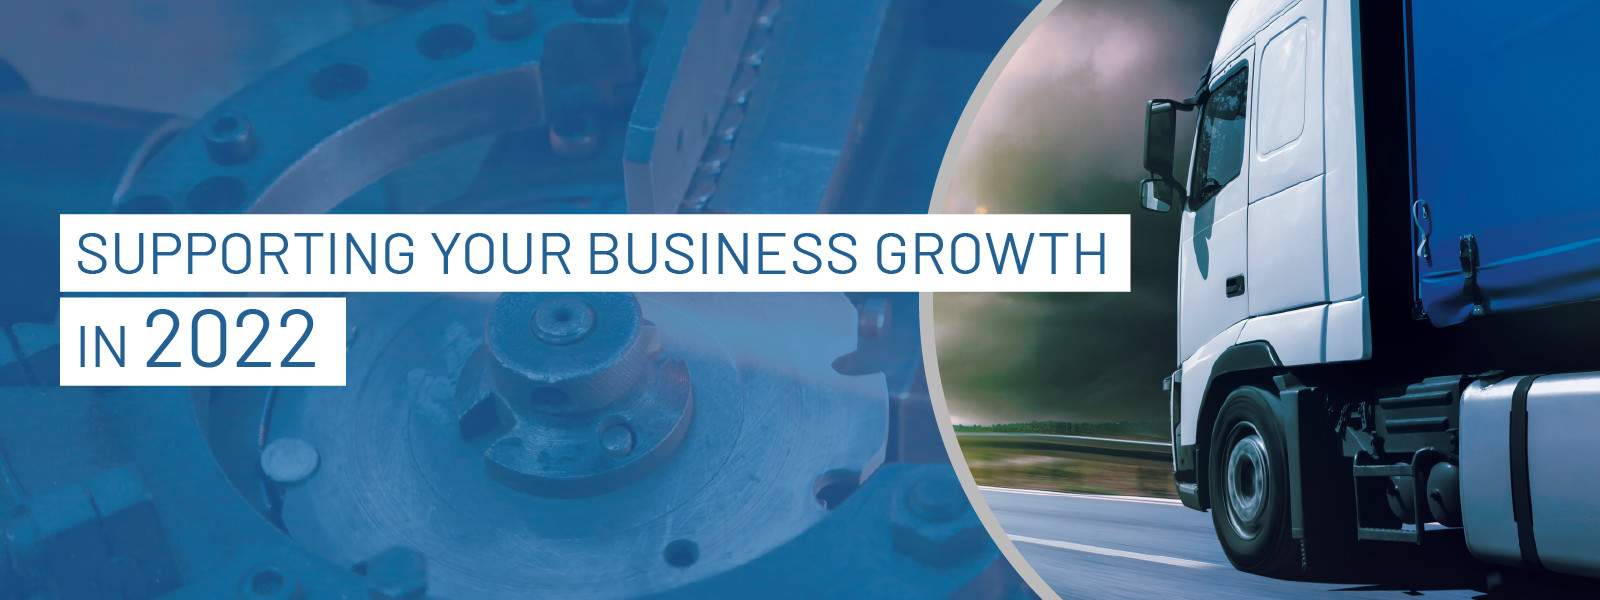 Supporting Your Business Growth In 2022